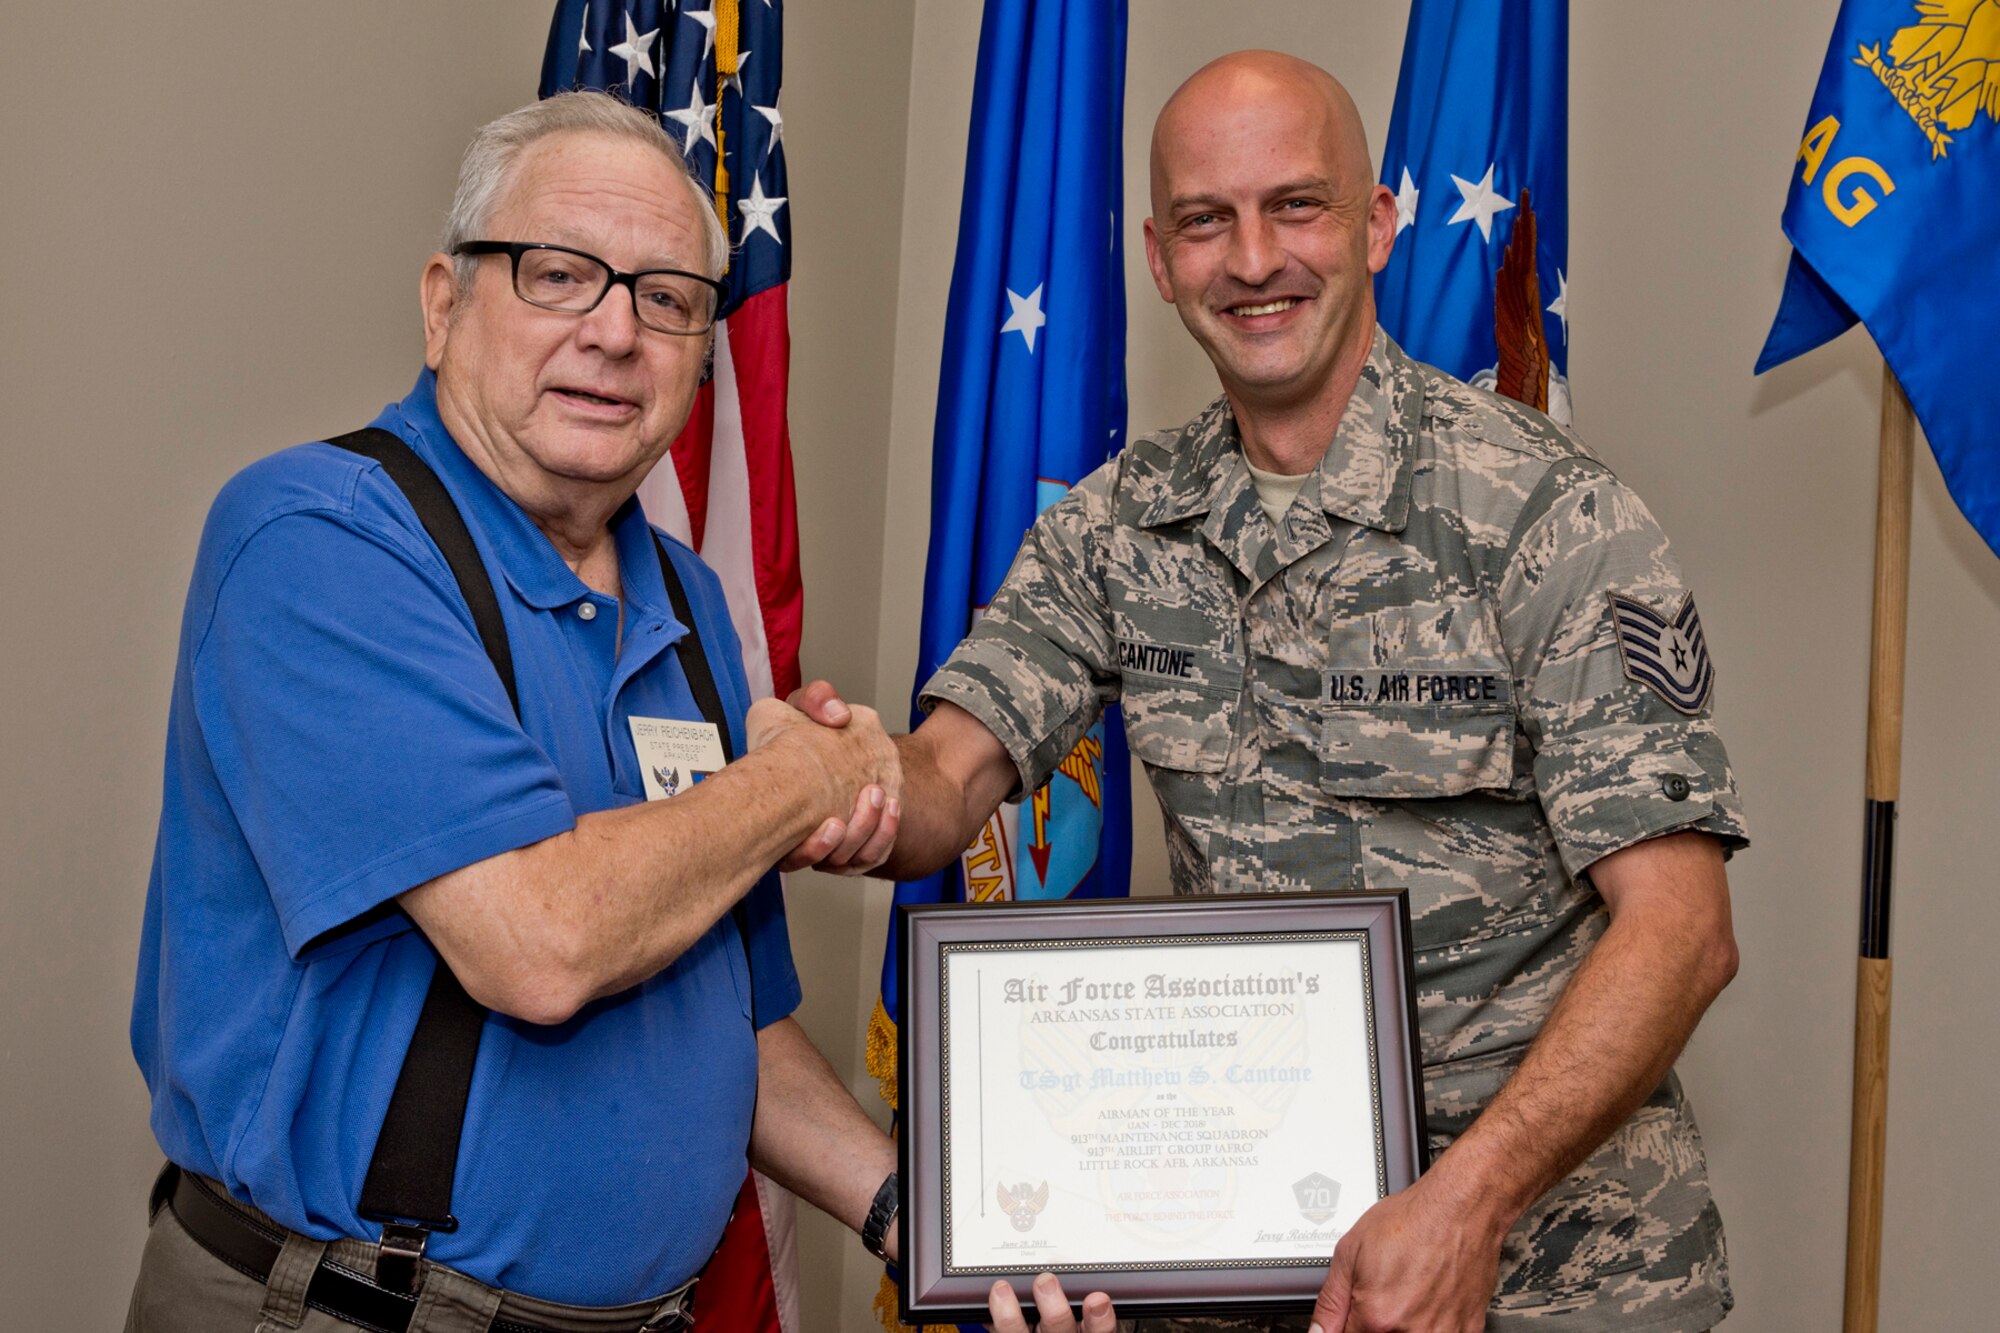 U.S. Air Force Reserve  Tech. Sgt. Matthew Cantone, services technician, 913th Force Support Squadron, and Jerry Reichenbach, the President of the Air Force Association of Arkansas, pose for a photo at Little Rock Air Force Base, Ark., June 21, 2018.